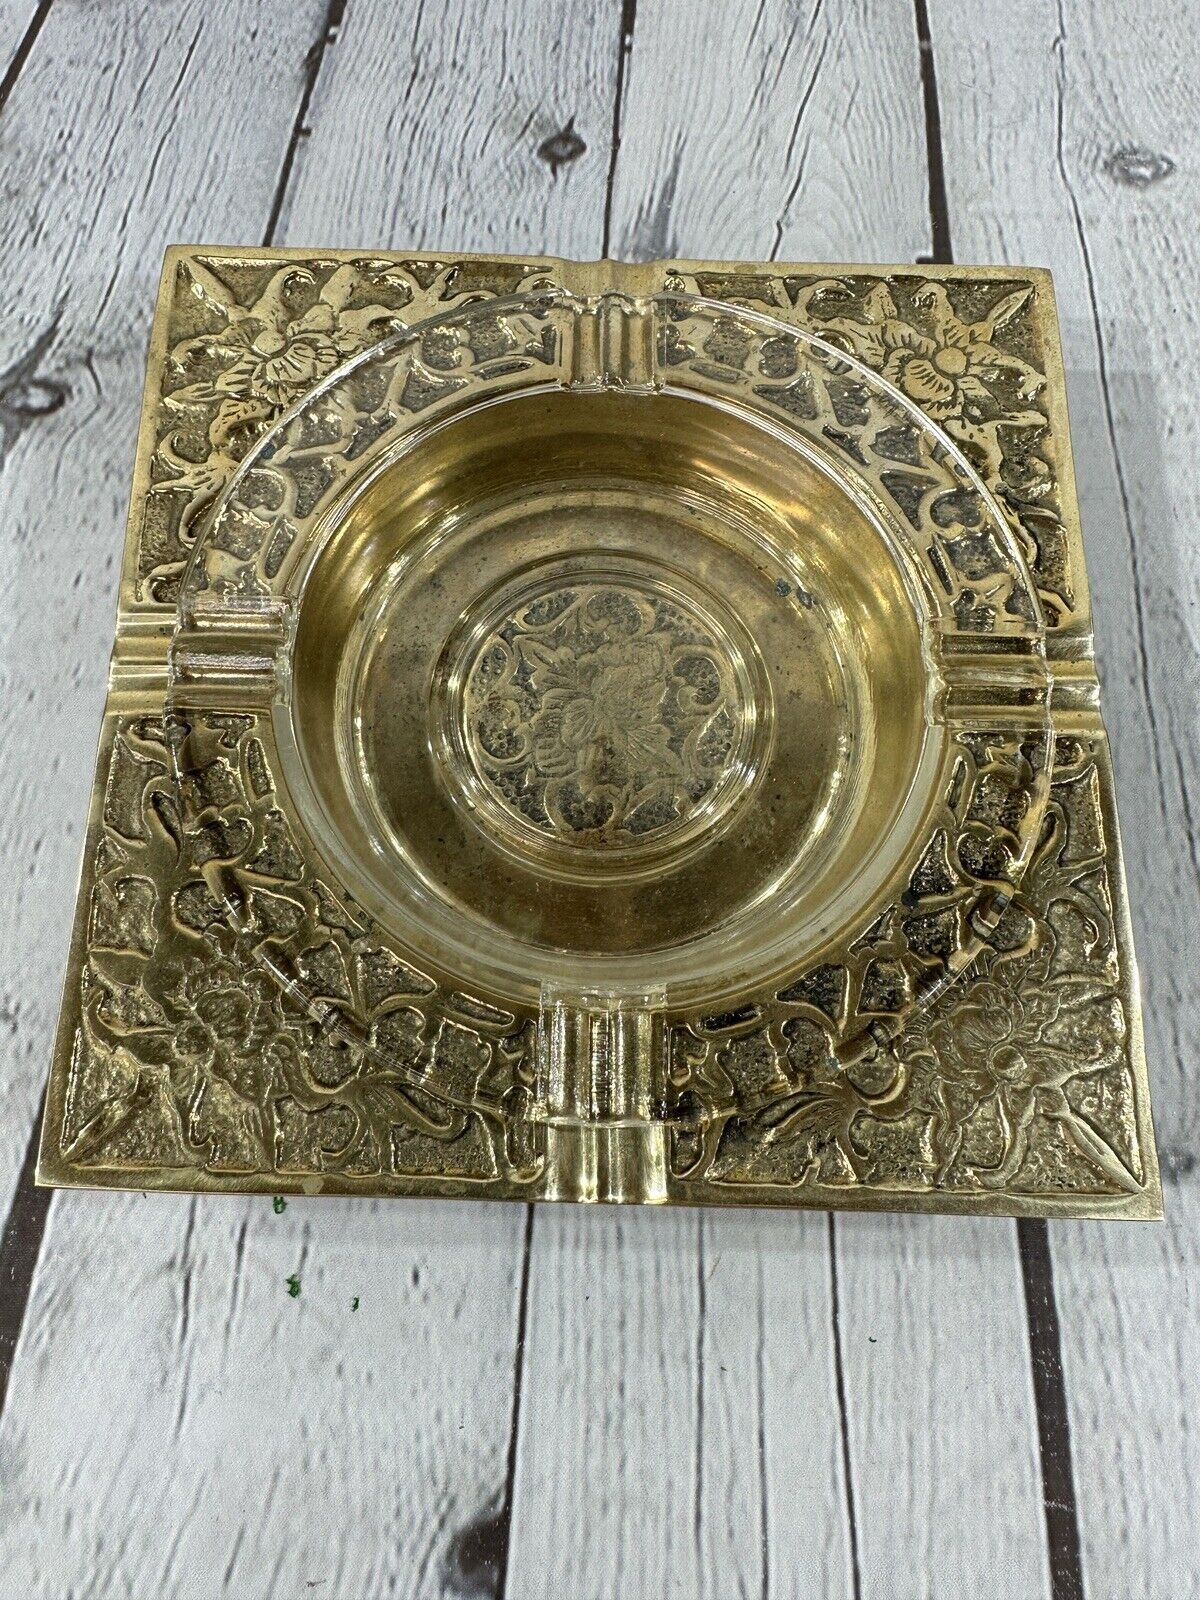 Vintage Square Brass Ashtray With Glass Ashtray Insert 7 3/8” Floral Designs VGC